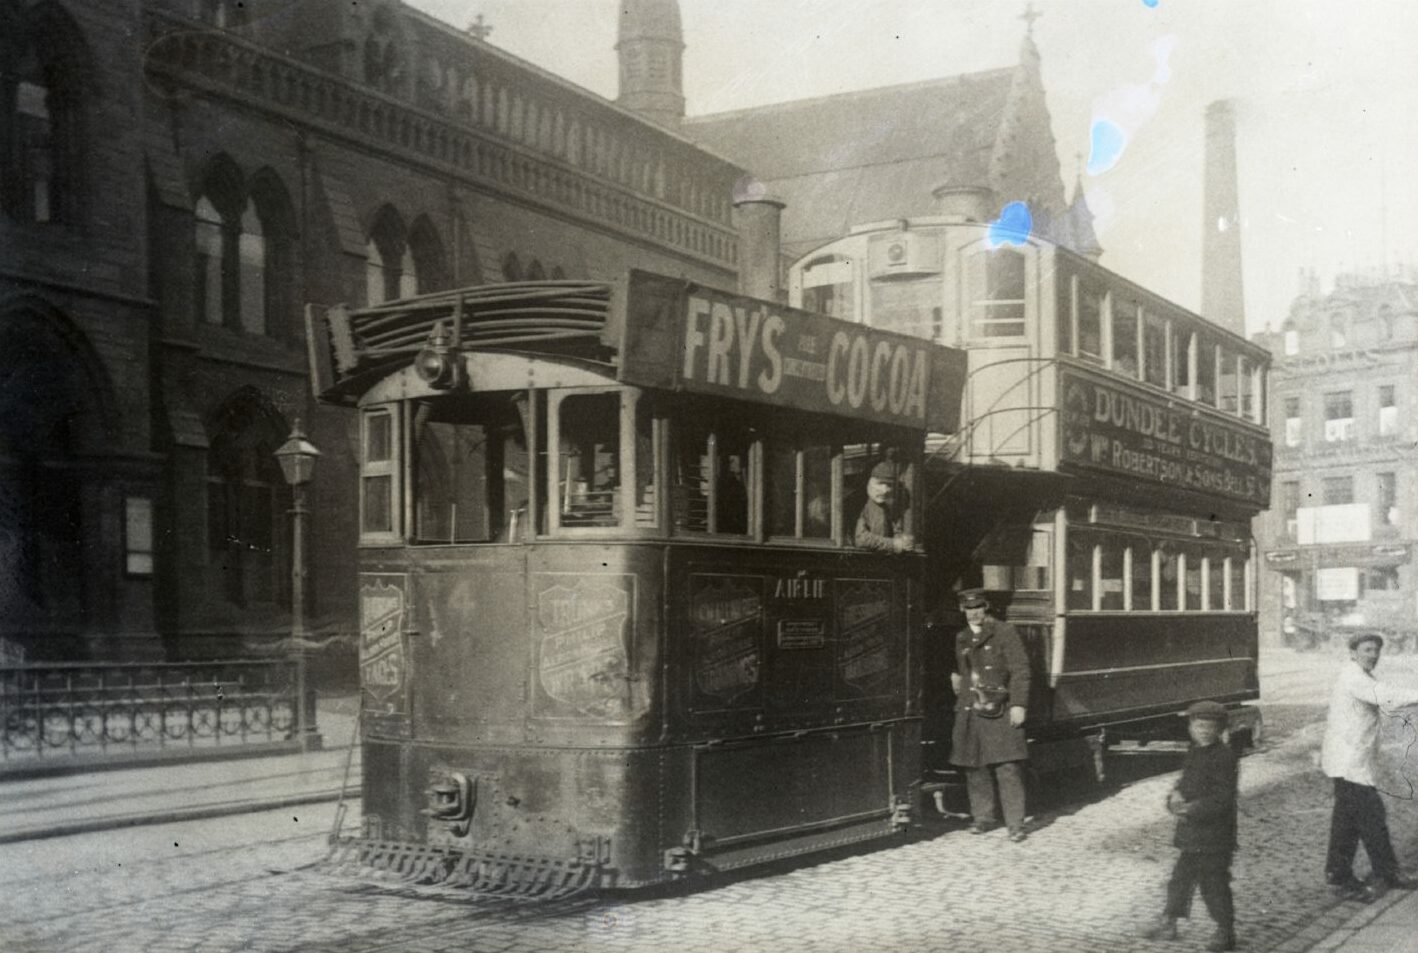 The steam tram in Dundee.